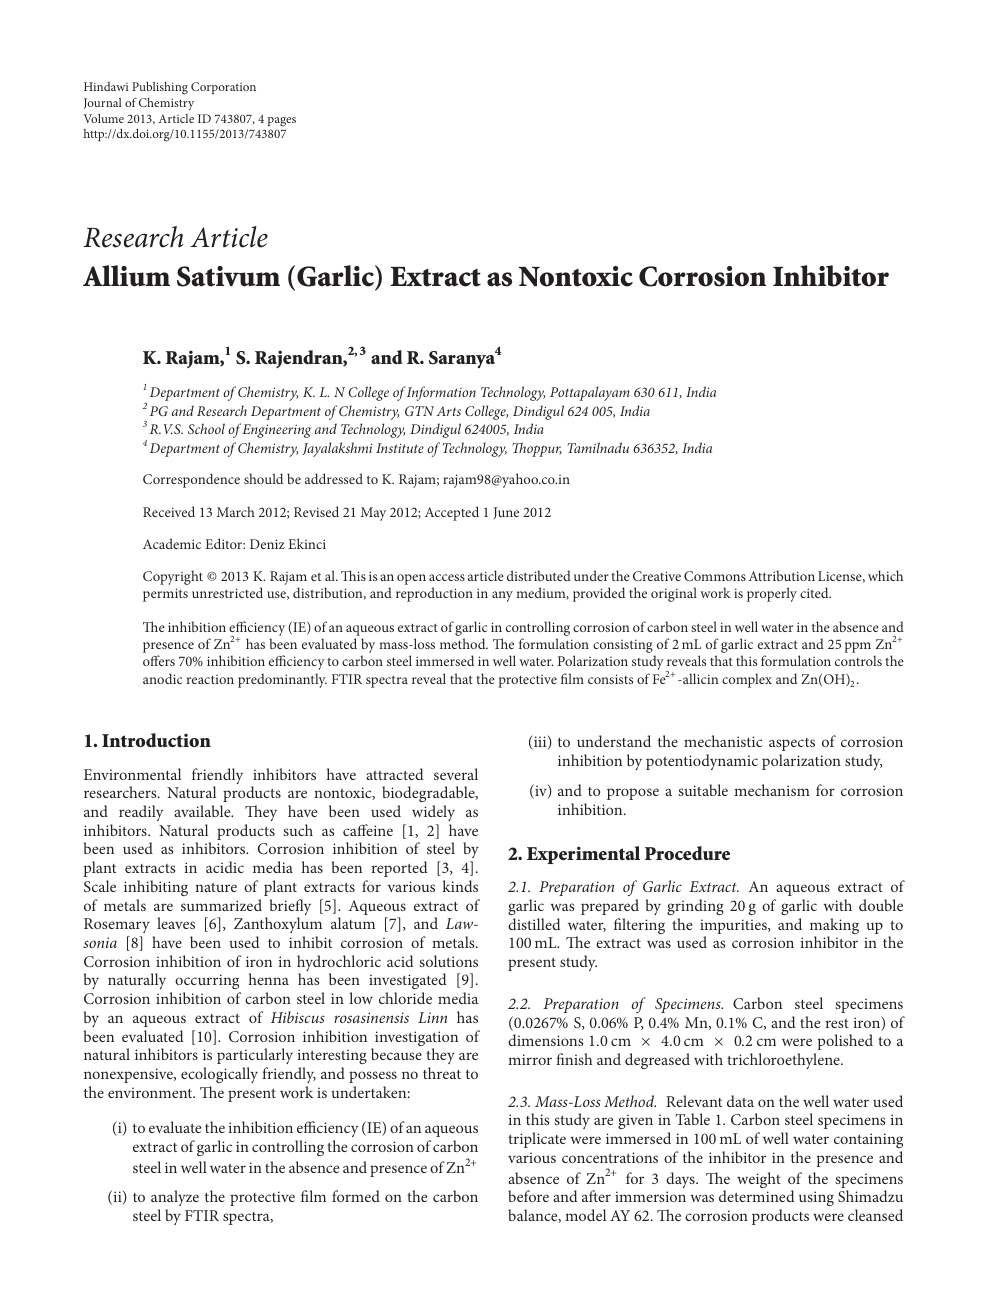 Allium Sativum Garlic Extract As Nontoxic Corrosion Inhibitor Topic Of Research Paper In Chemical Sciences Download Scholarly Article Pdf And Read For Free On Cyberleninka Open Science Hub